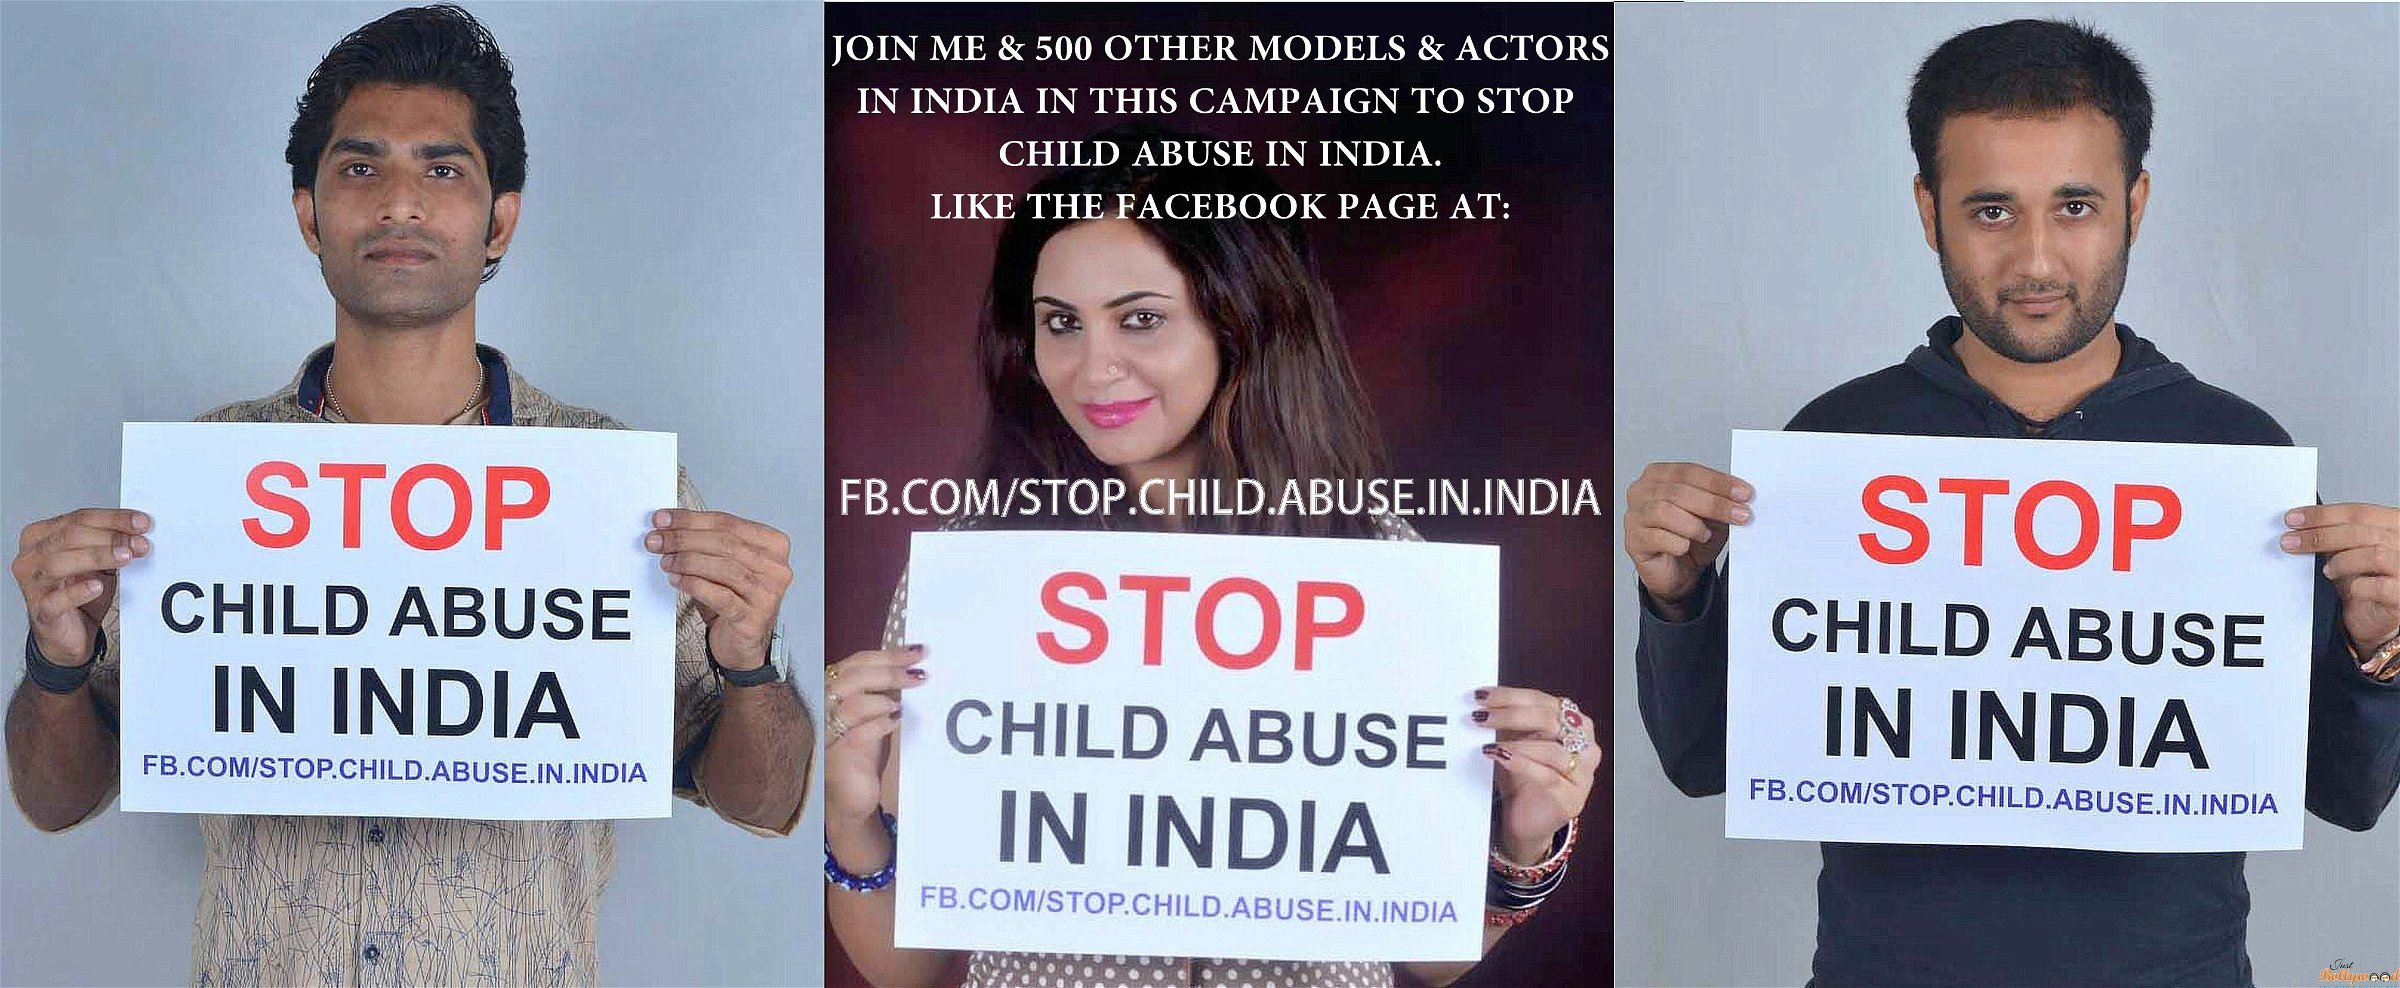 stop hiding child abuse in india